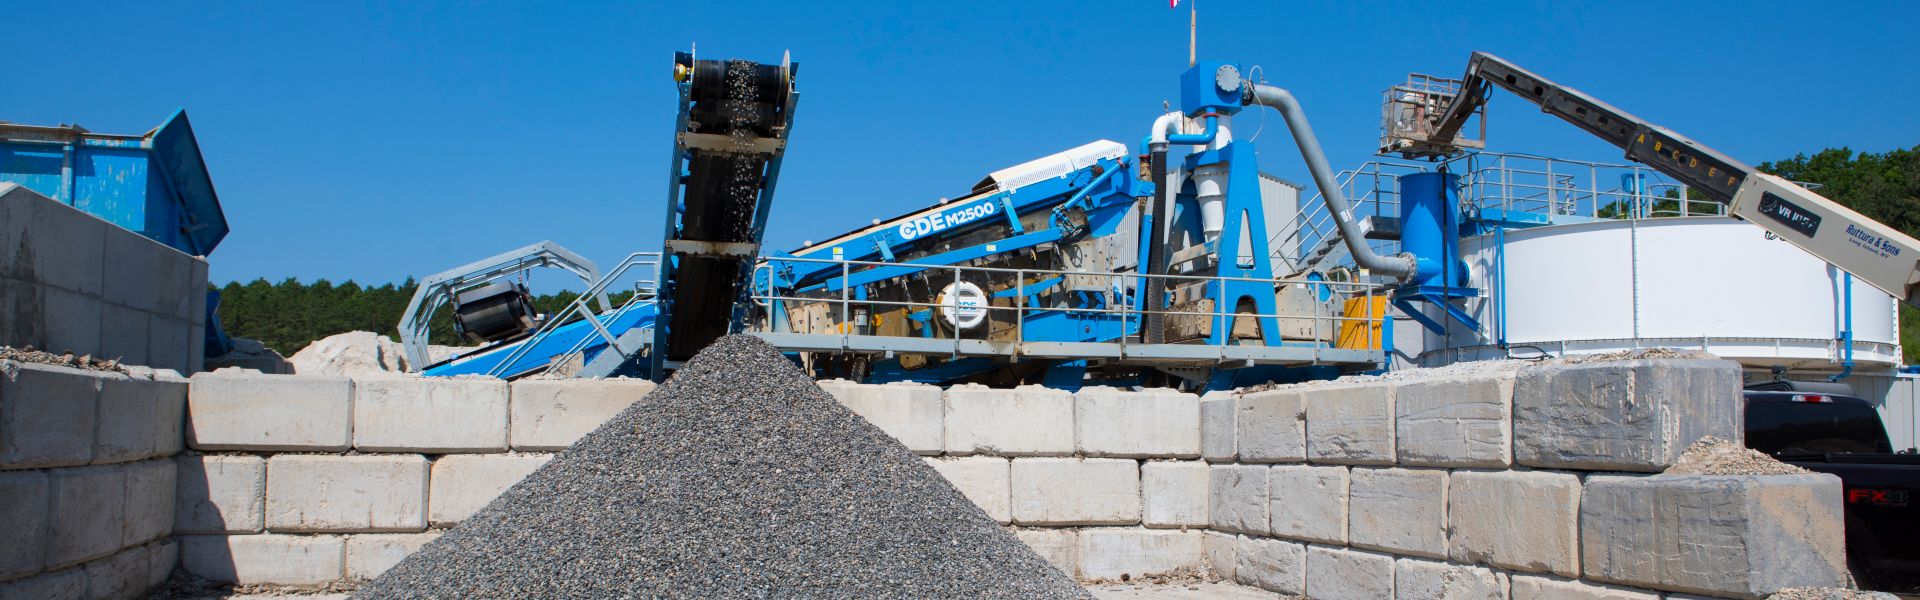 Technology and Practice Key to Optimising Concrete with Recycled Materials